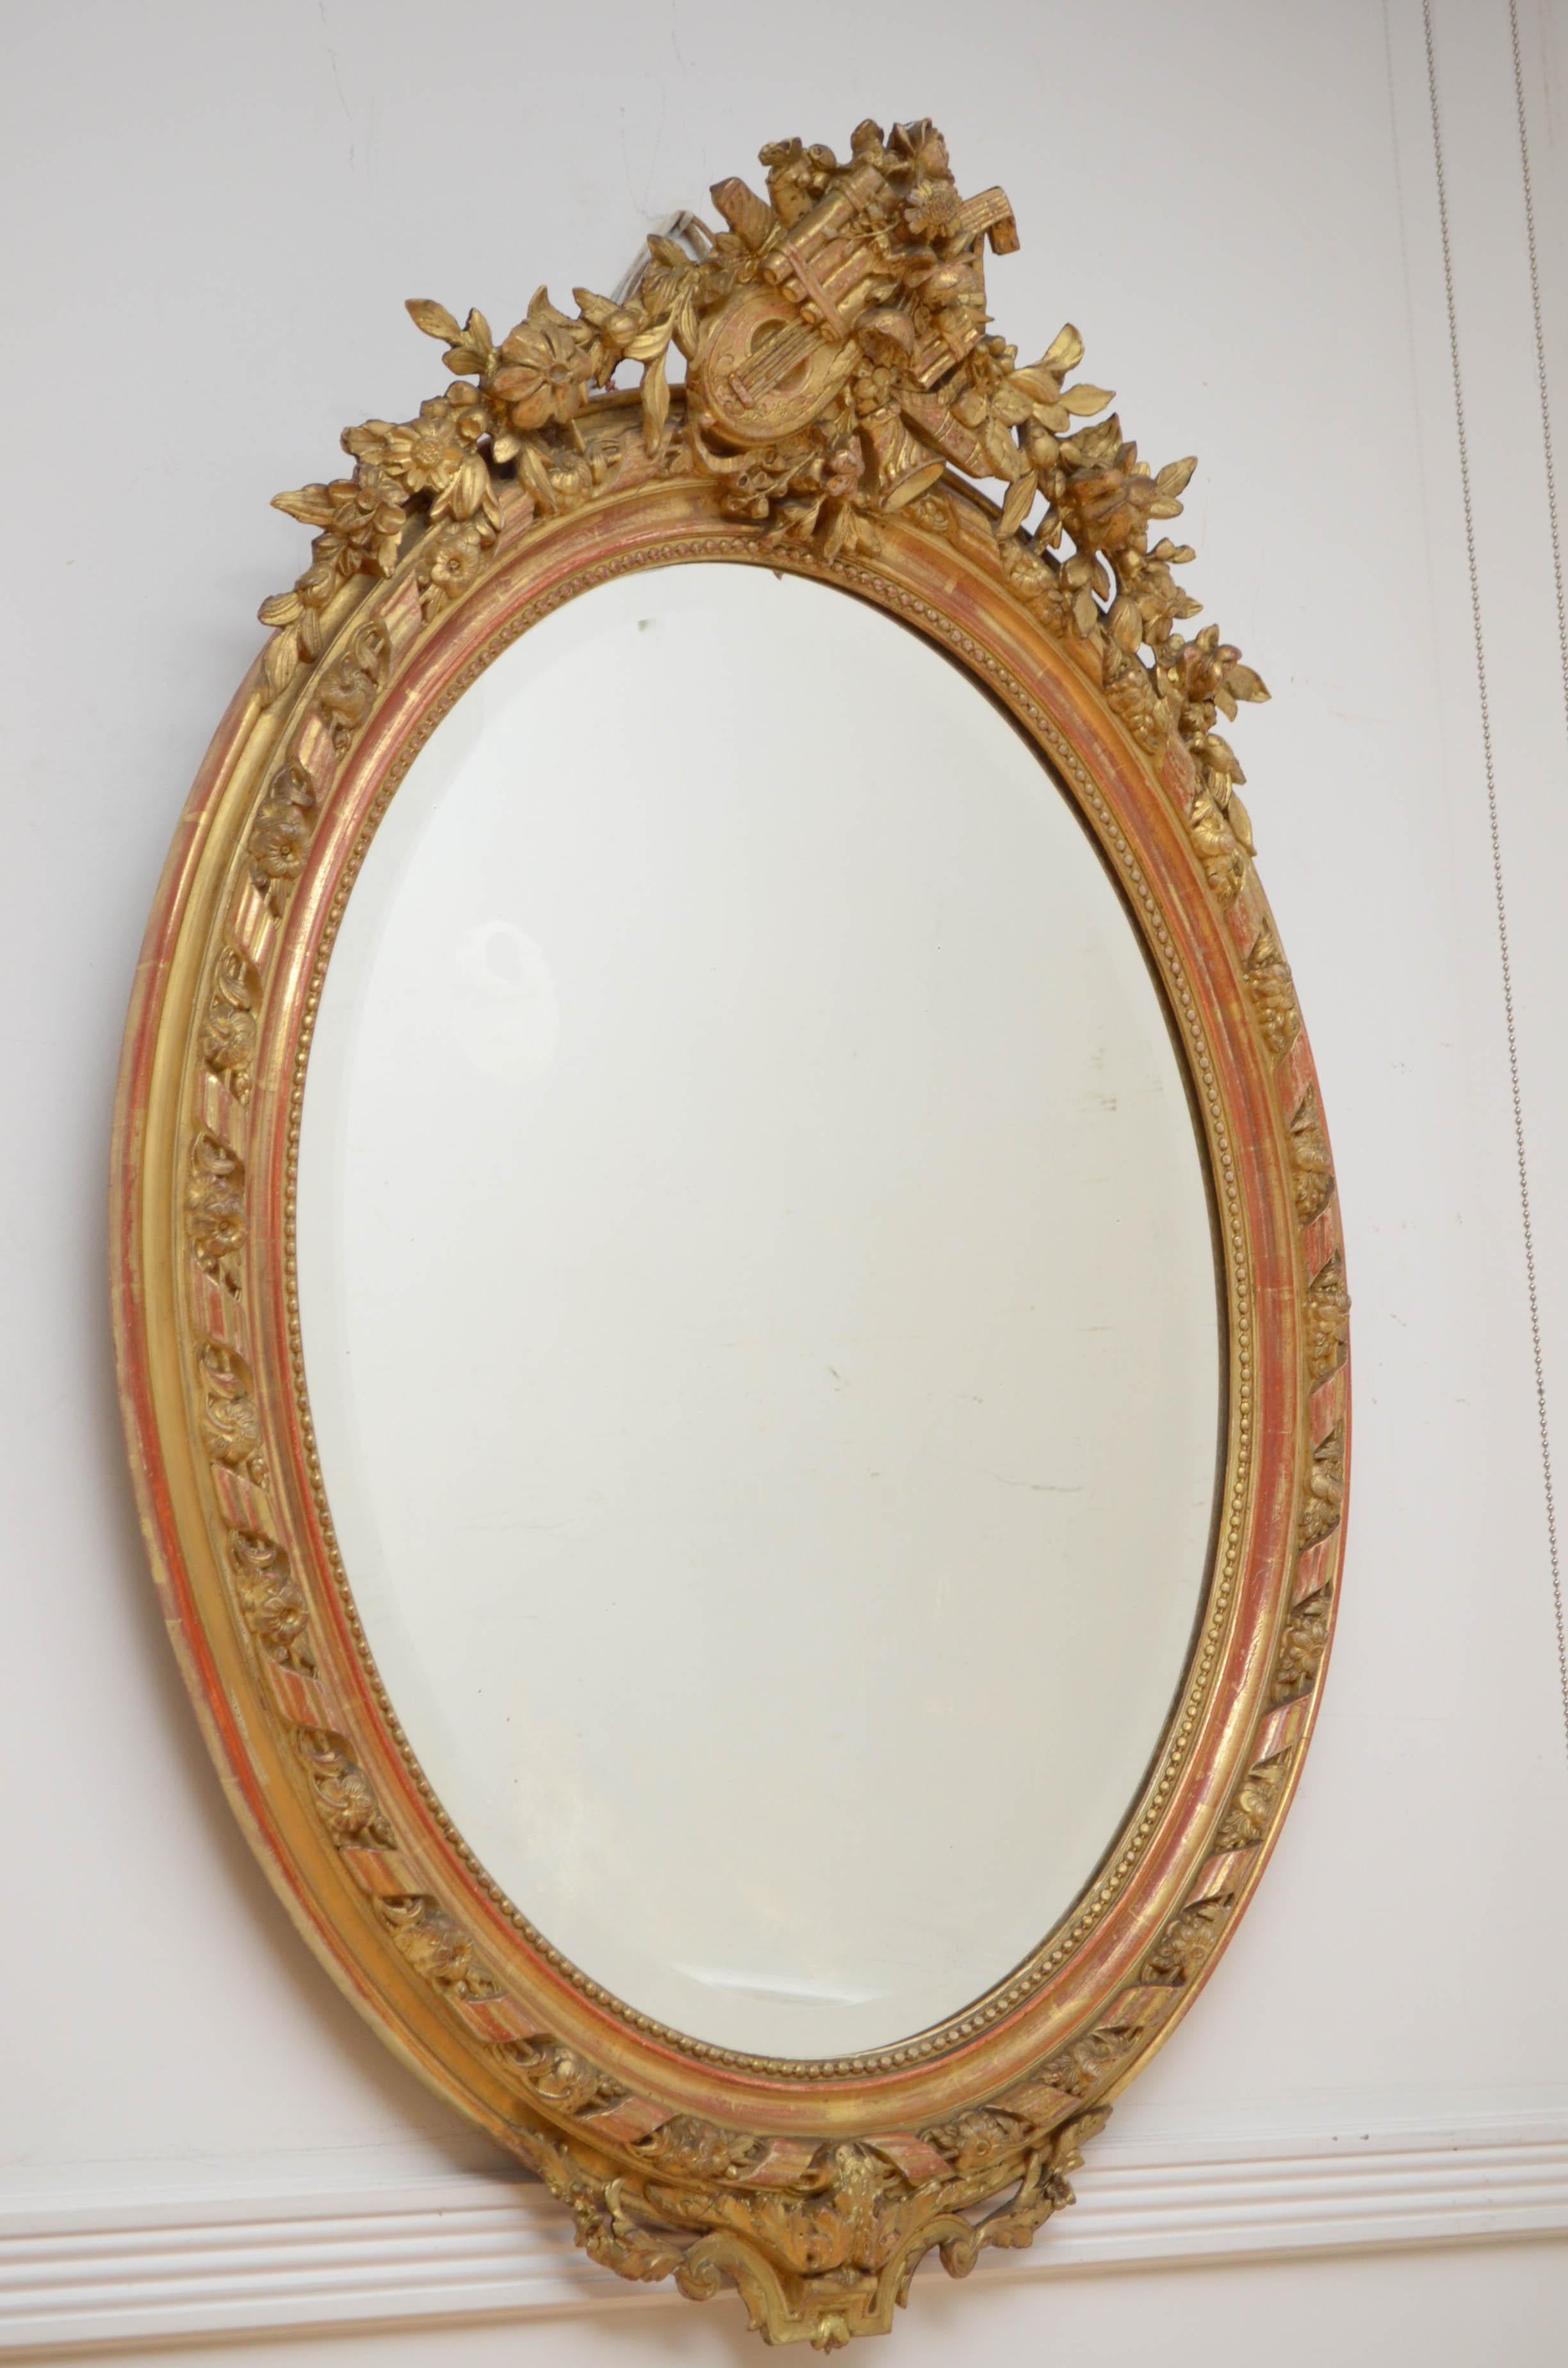 0218 Fine 19th century hand carved mirror in Belle Epoque Style, having original bevelled edge glass with some speckle in finely carved frame. The frame is carved with ‘les pearls’ which symbolises strand of pearls and leaf motifs throughout. The